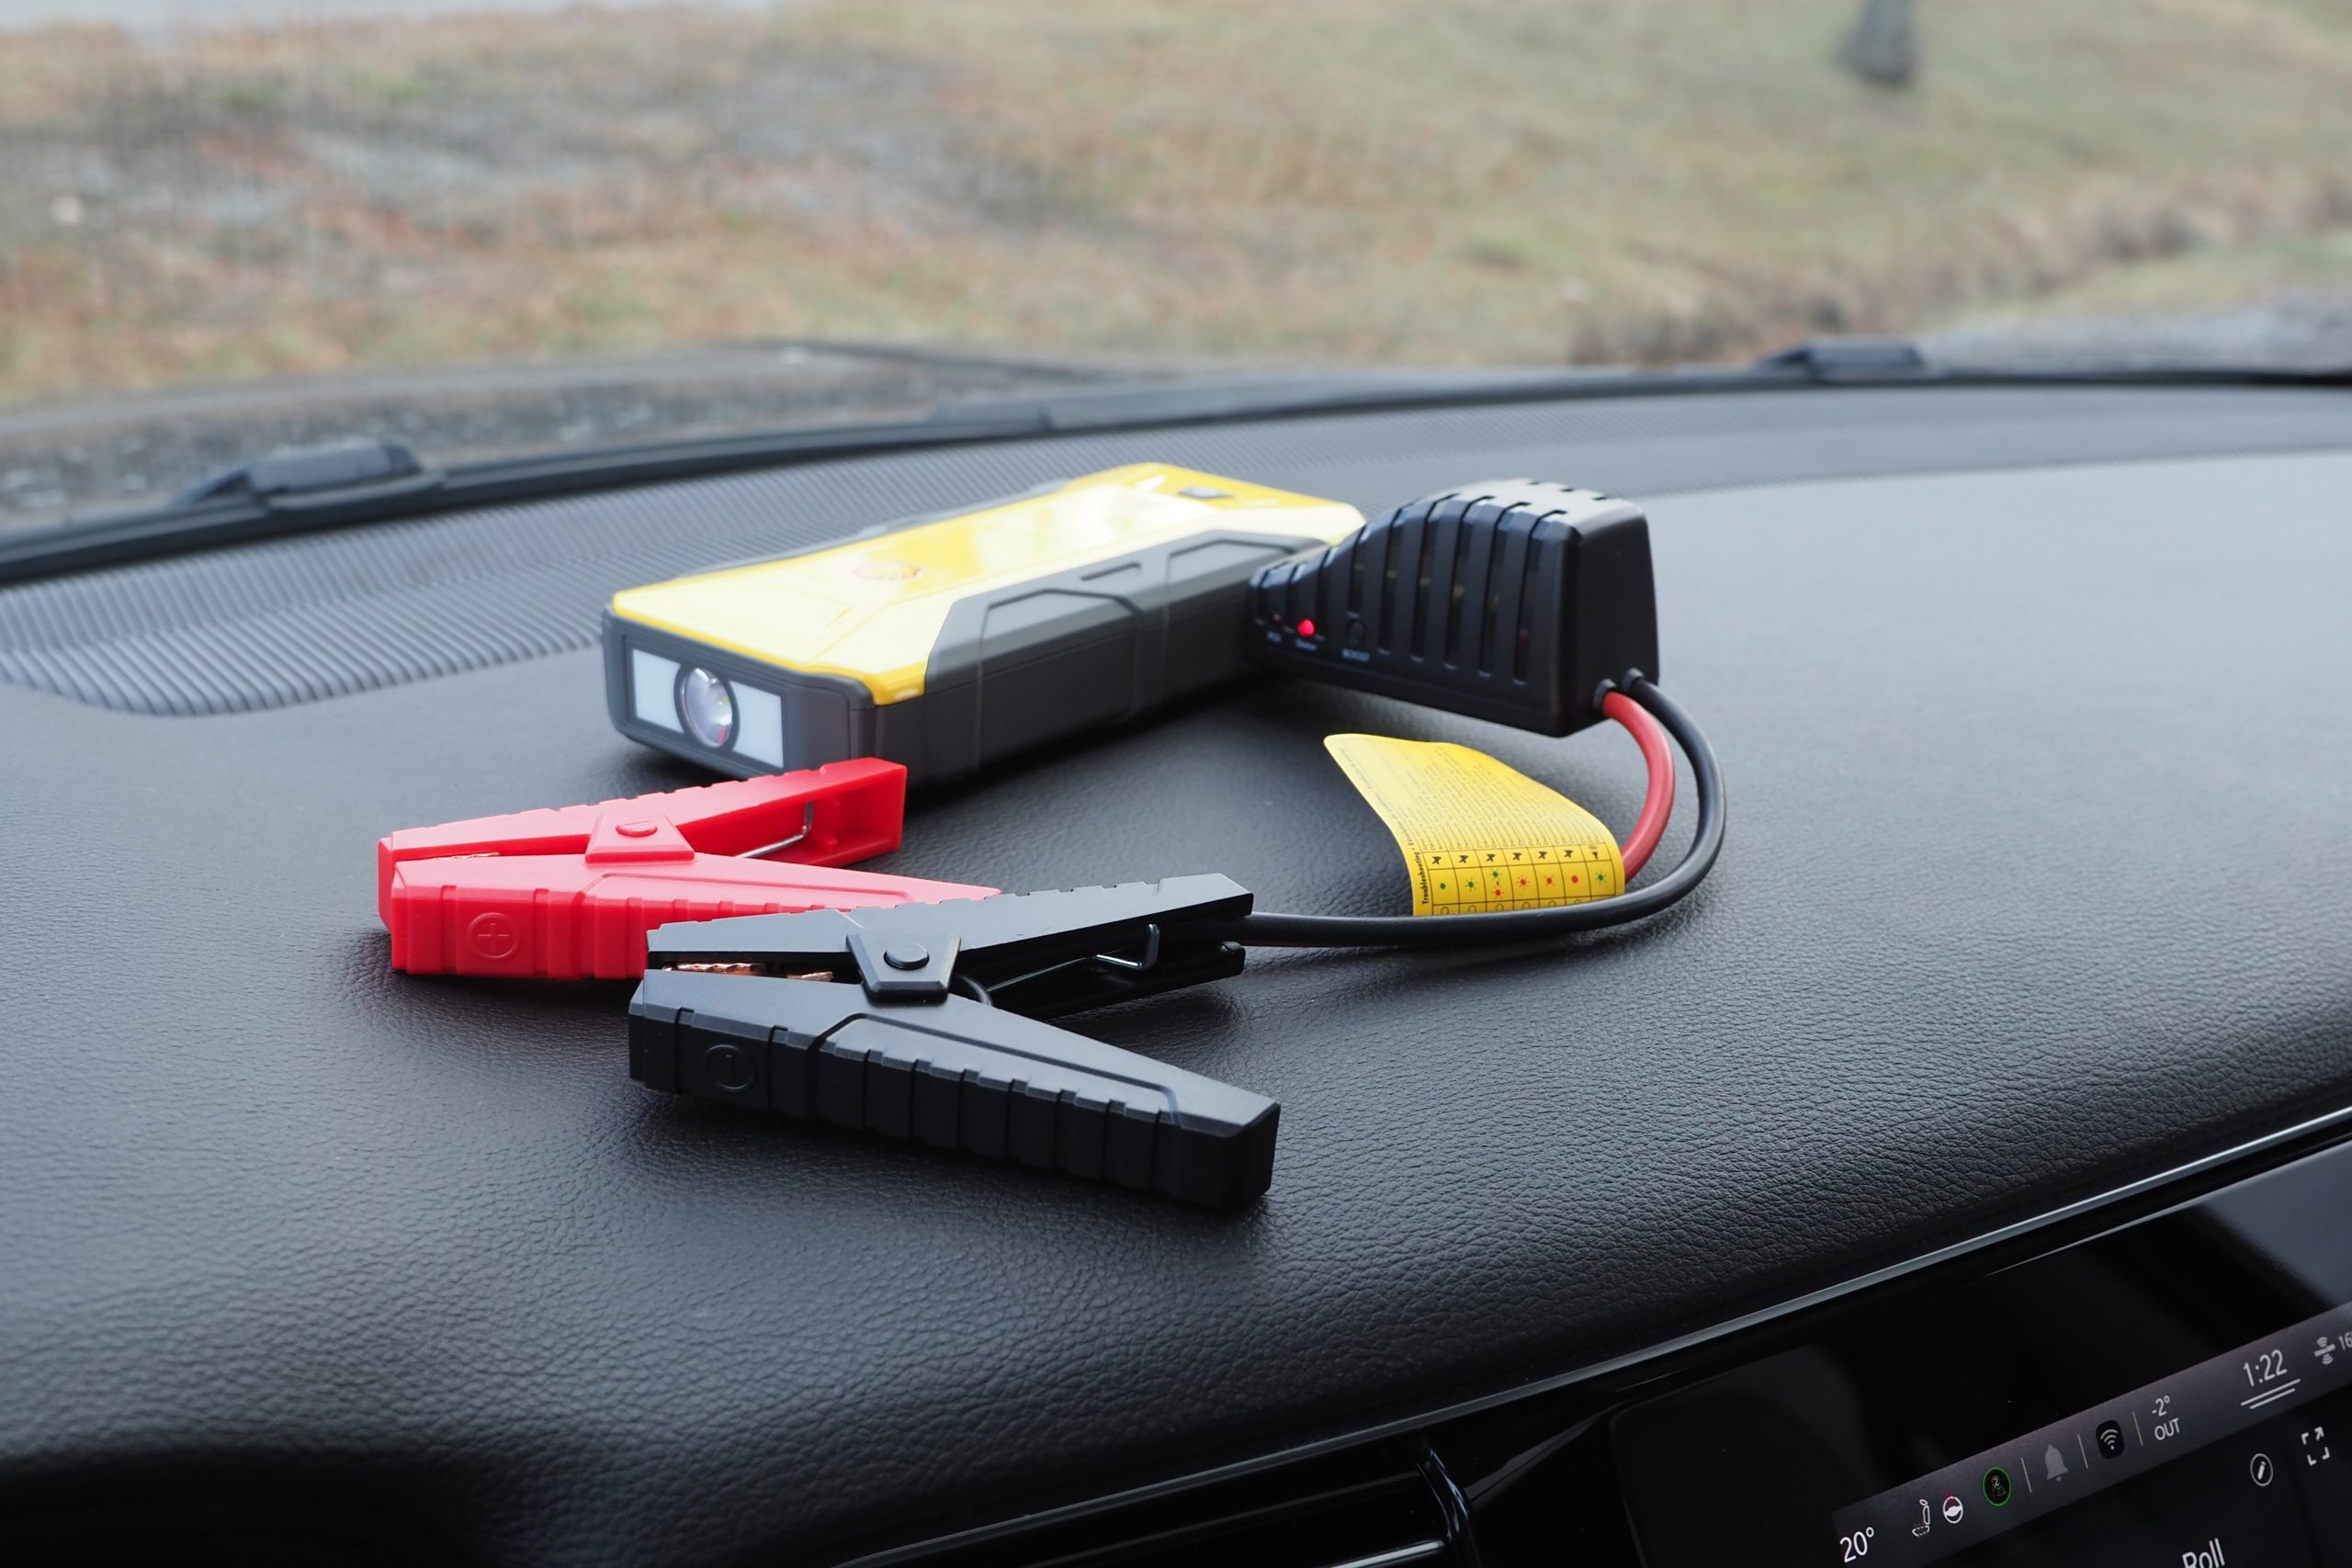 Jump Starter vs Booster Cables: Which is Better for Battery Health